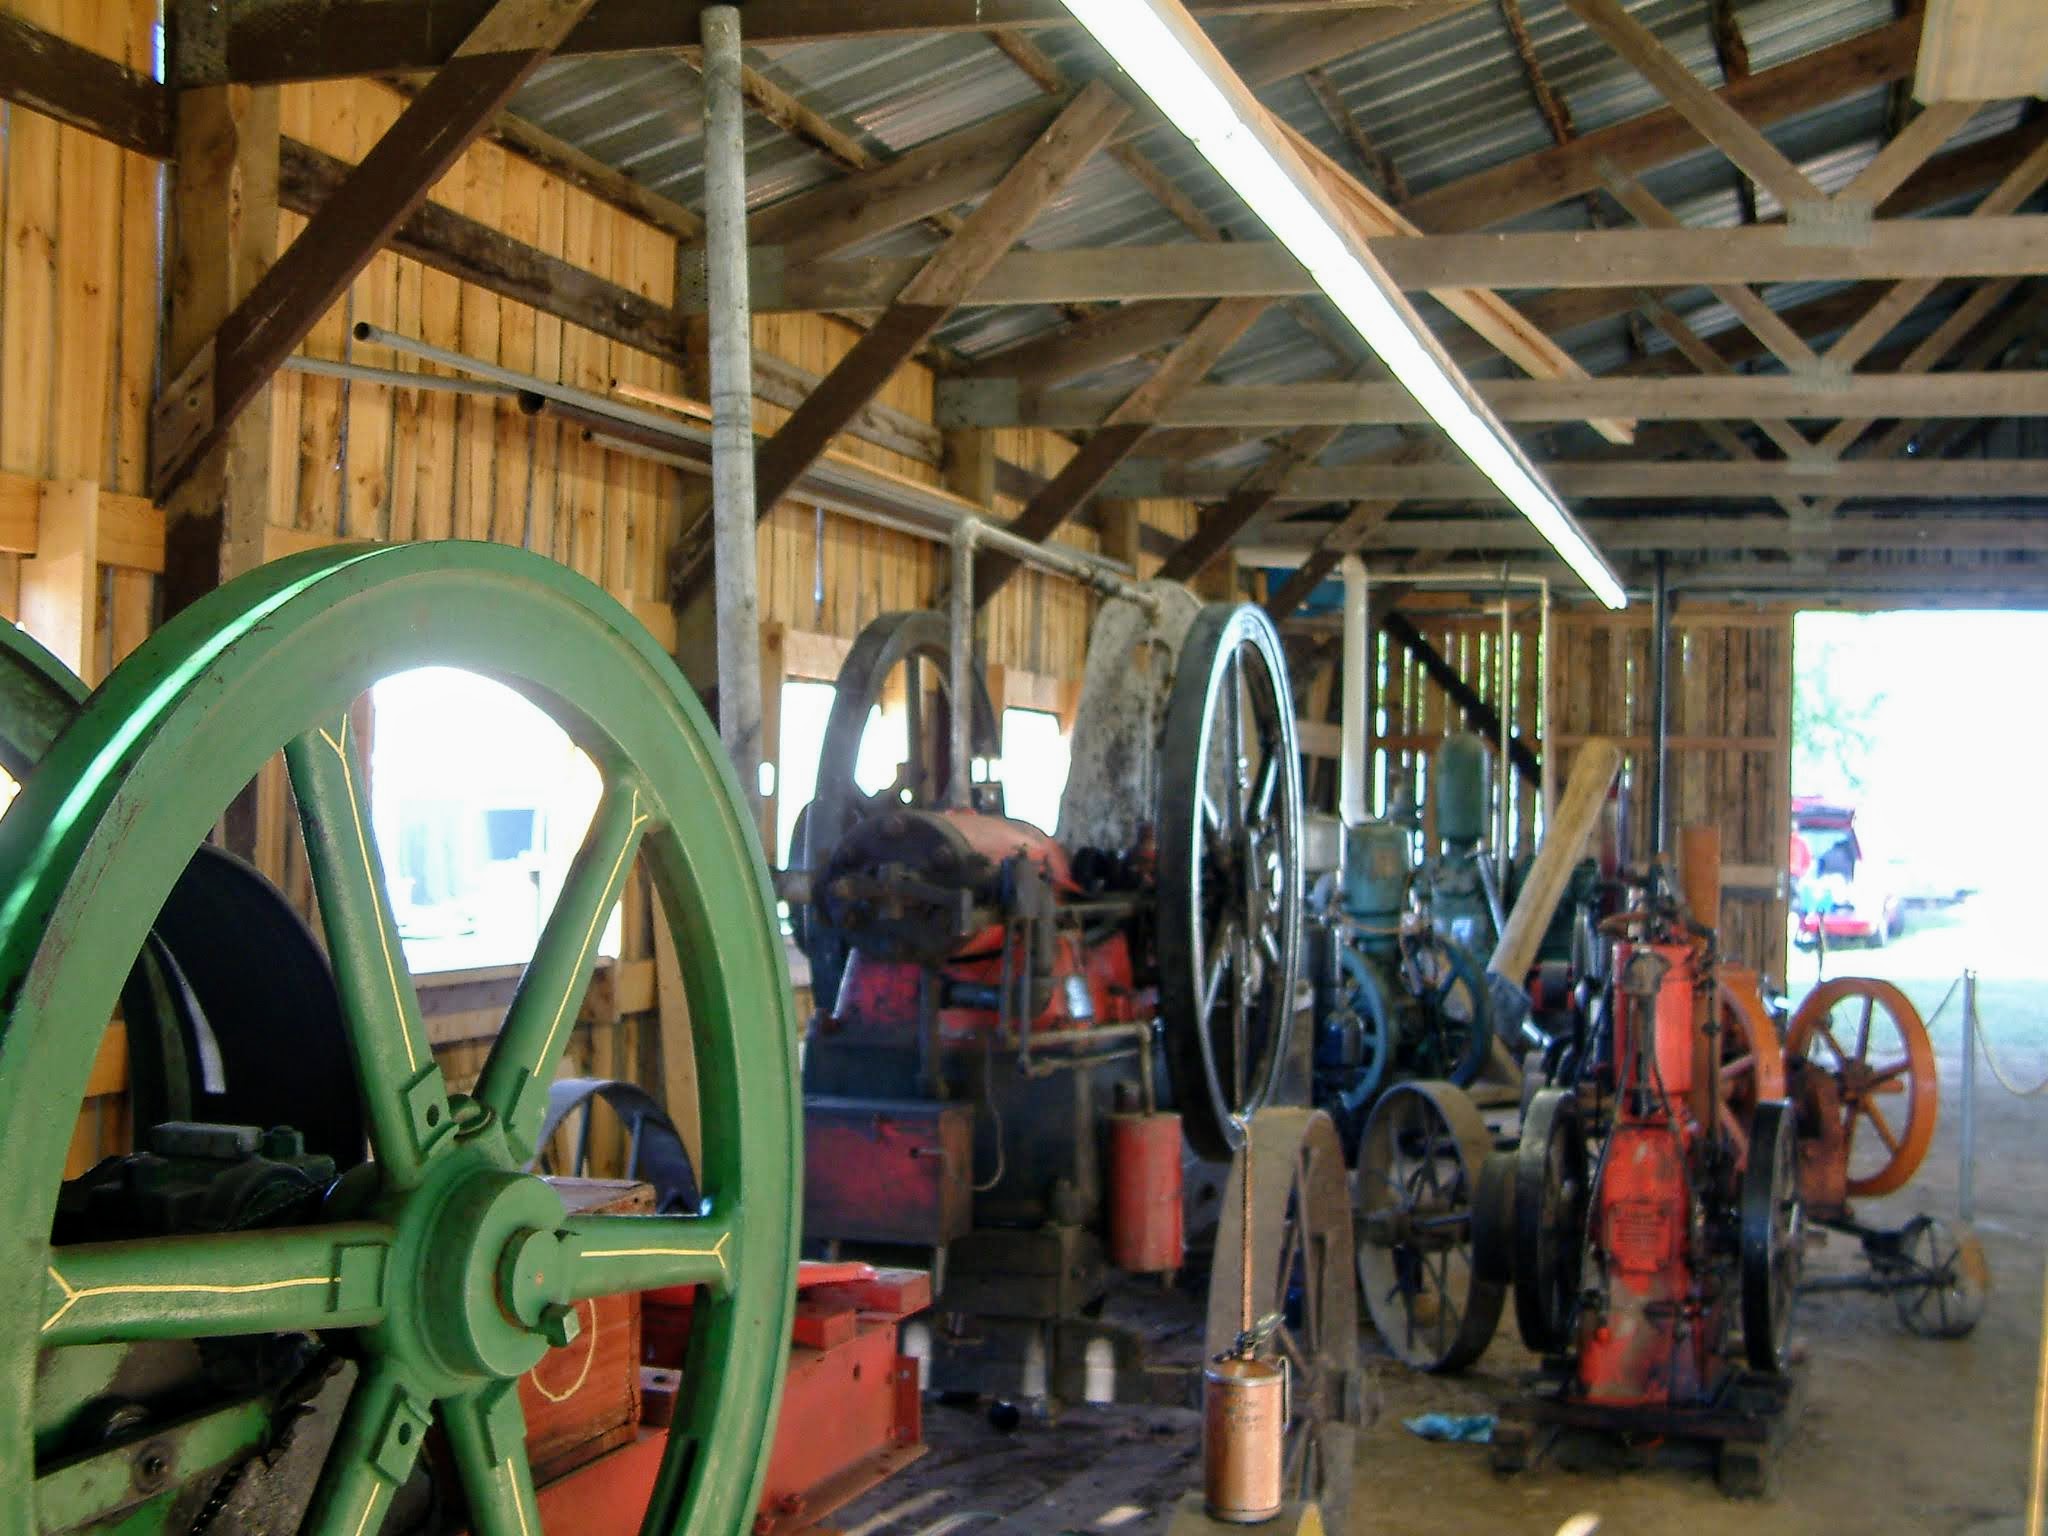 Inside Small Engine Building at Nowthen Threshing Show in 2007.